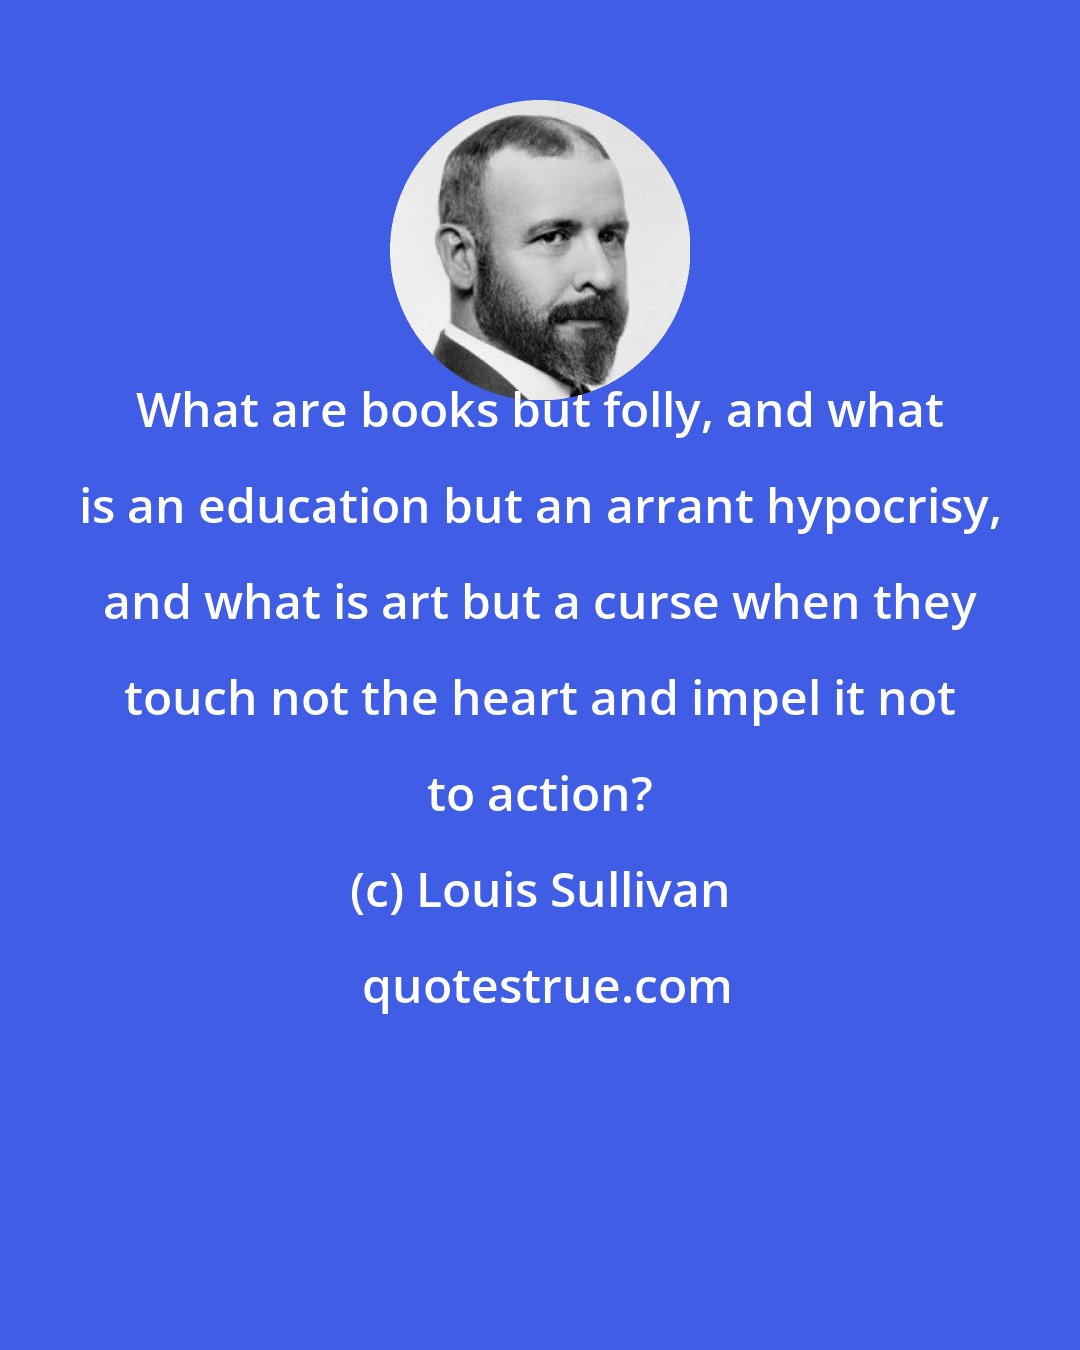 Louis Sullivan: What are books but folly, and what is an education but an arrant hypocrisy, and what is art but a curse when they touch not the heart and impel it not to action?